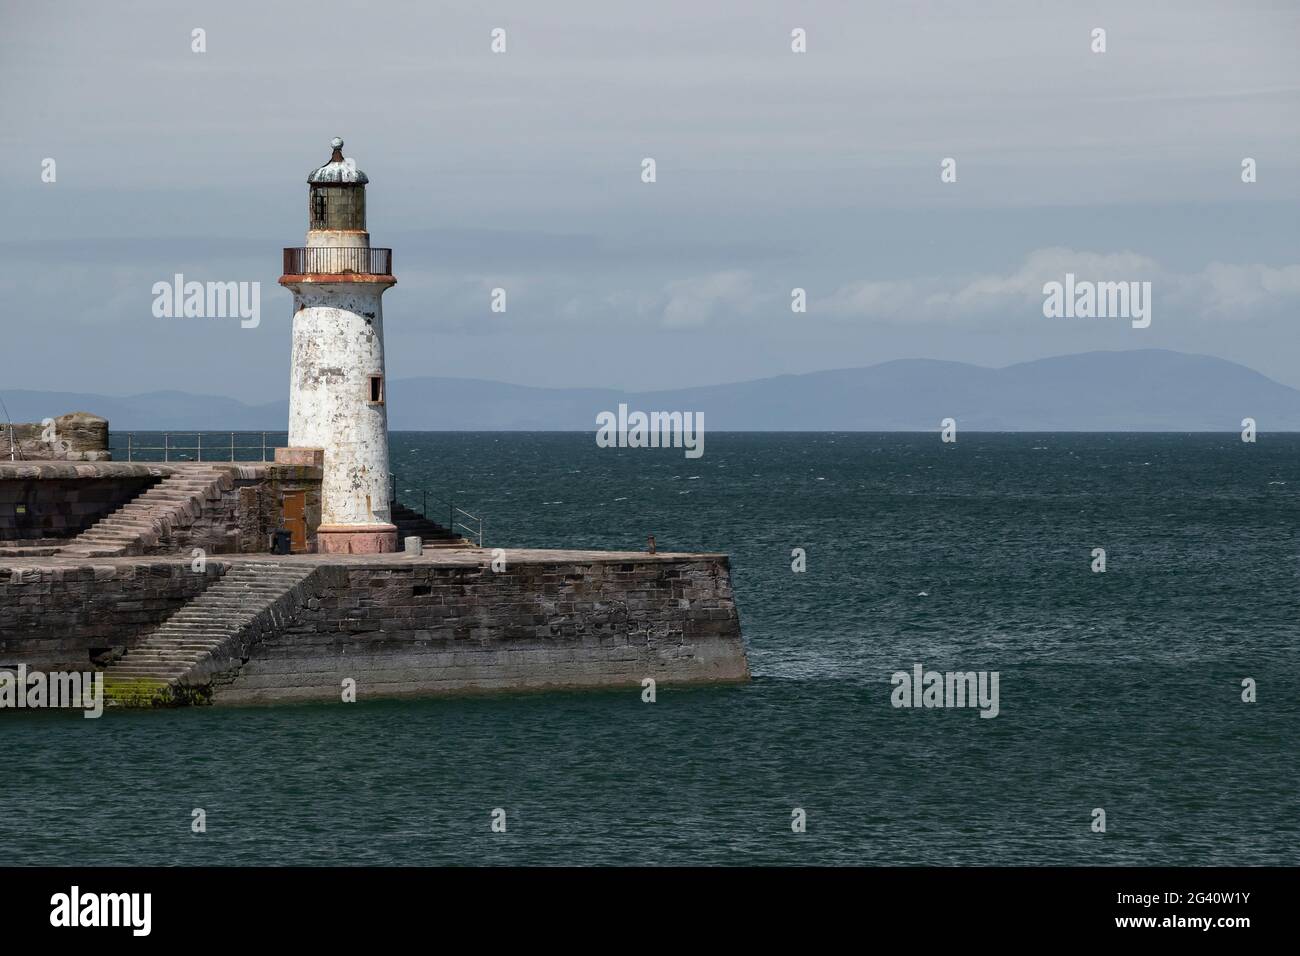 Whitehaven, Cumbria, England. 15 June 2021. Witehaven's west pier lighthouse showing part of Scotland on the horizon. Stock Photo